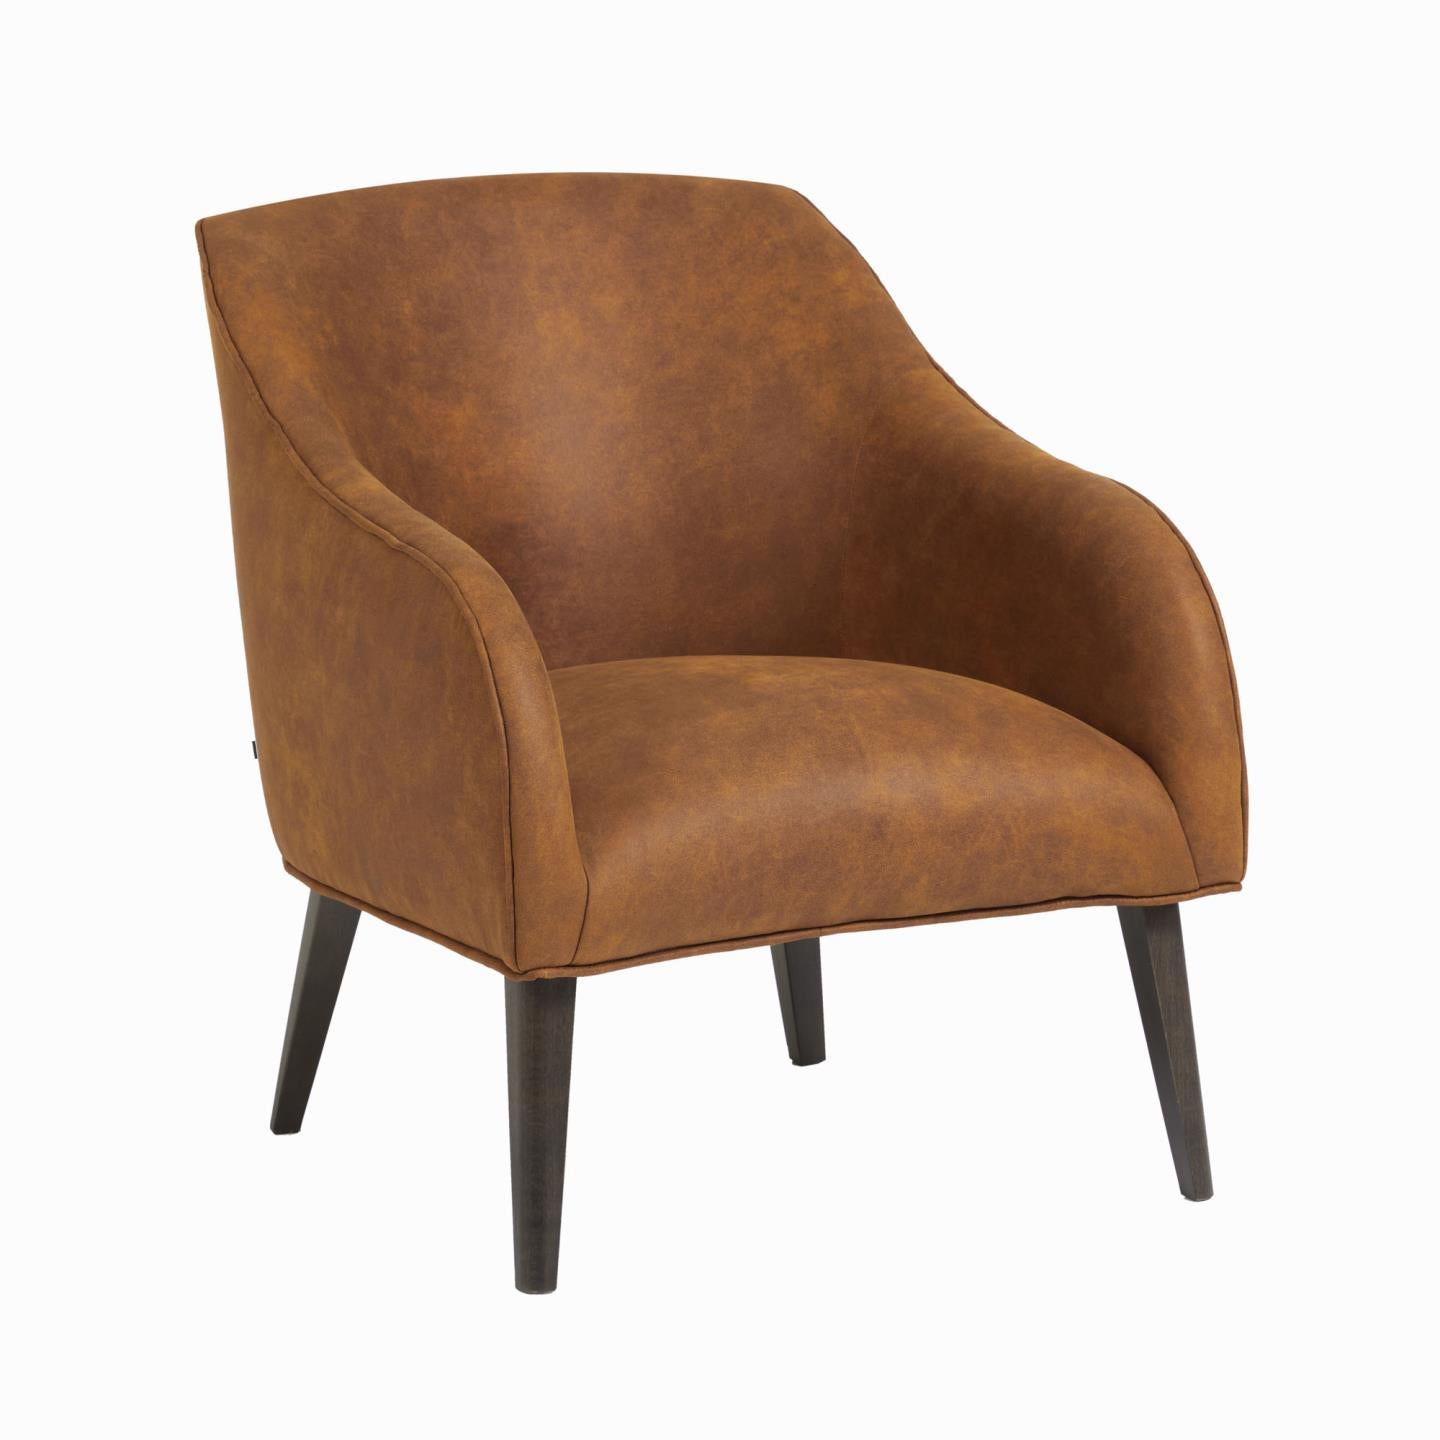 Bobly armchair in light brown fabric with wenge finish legs